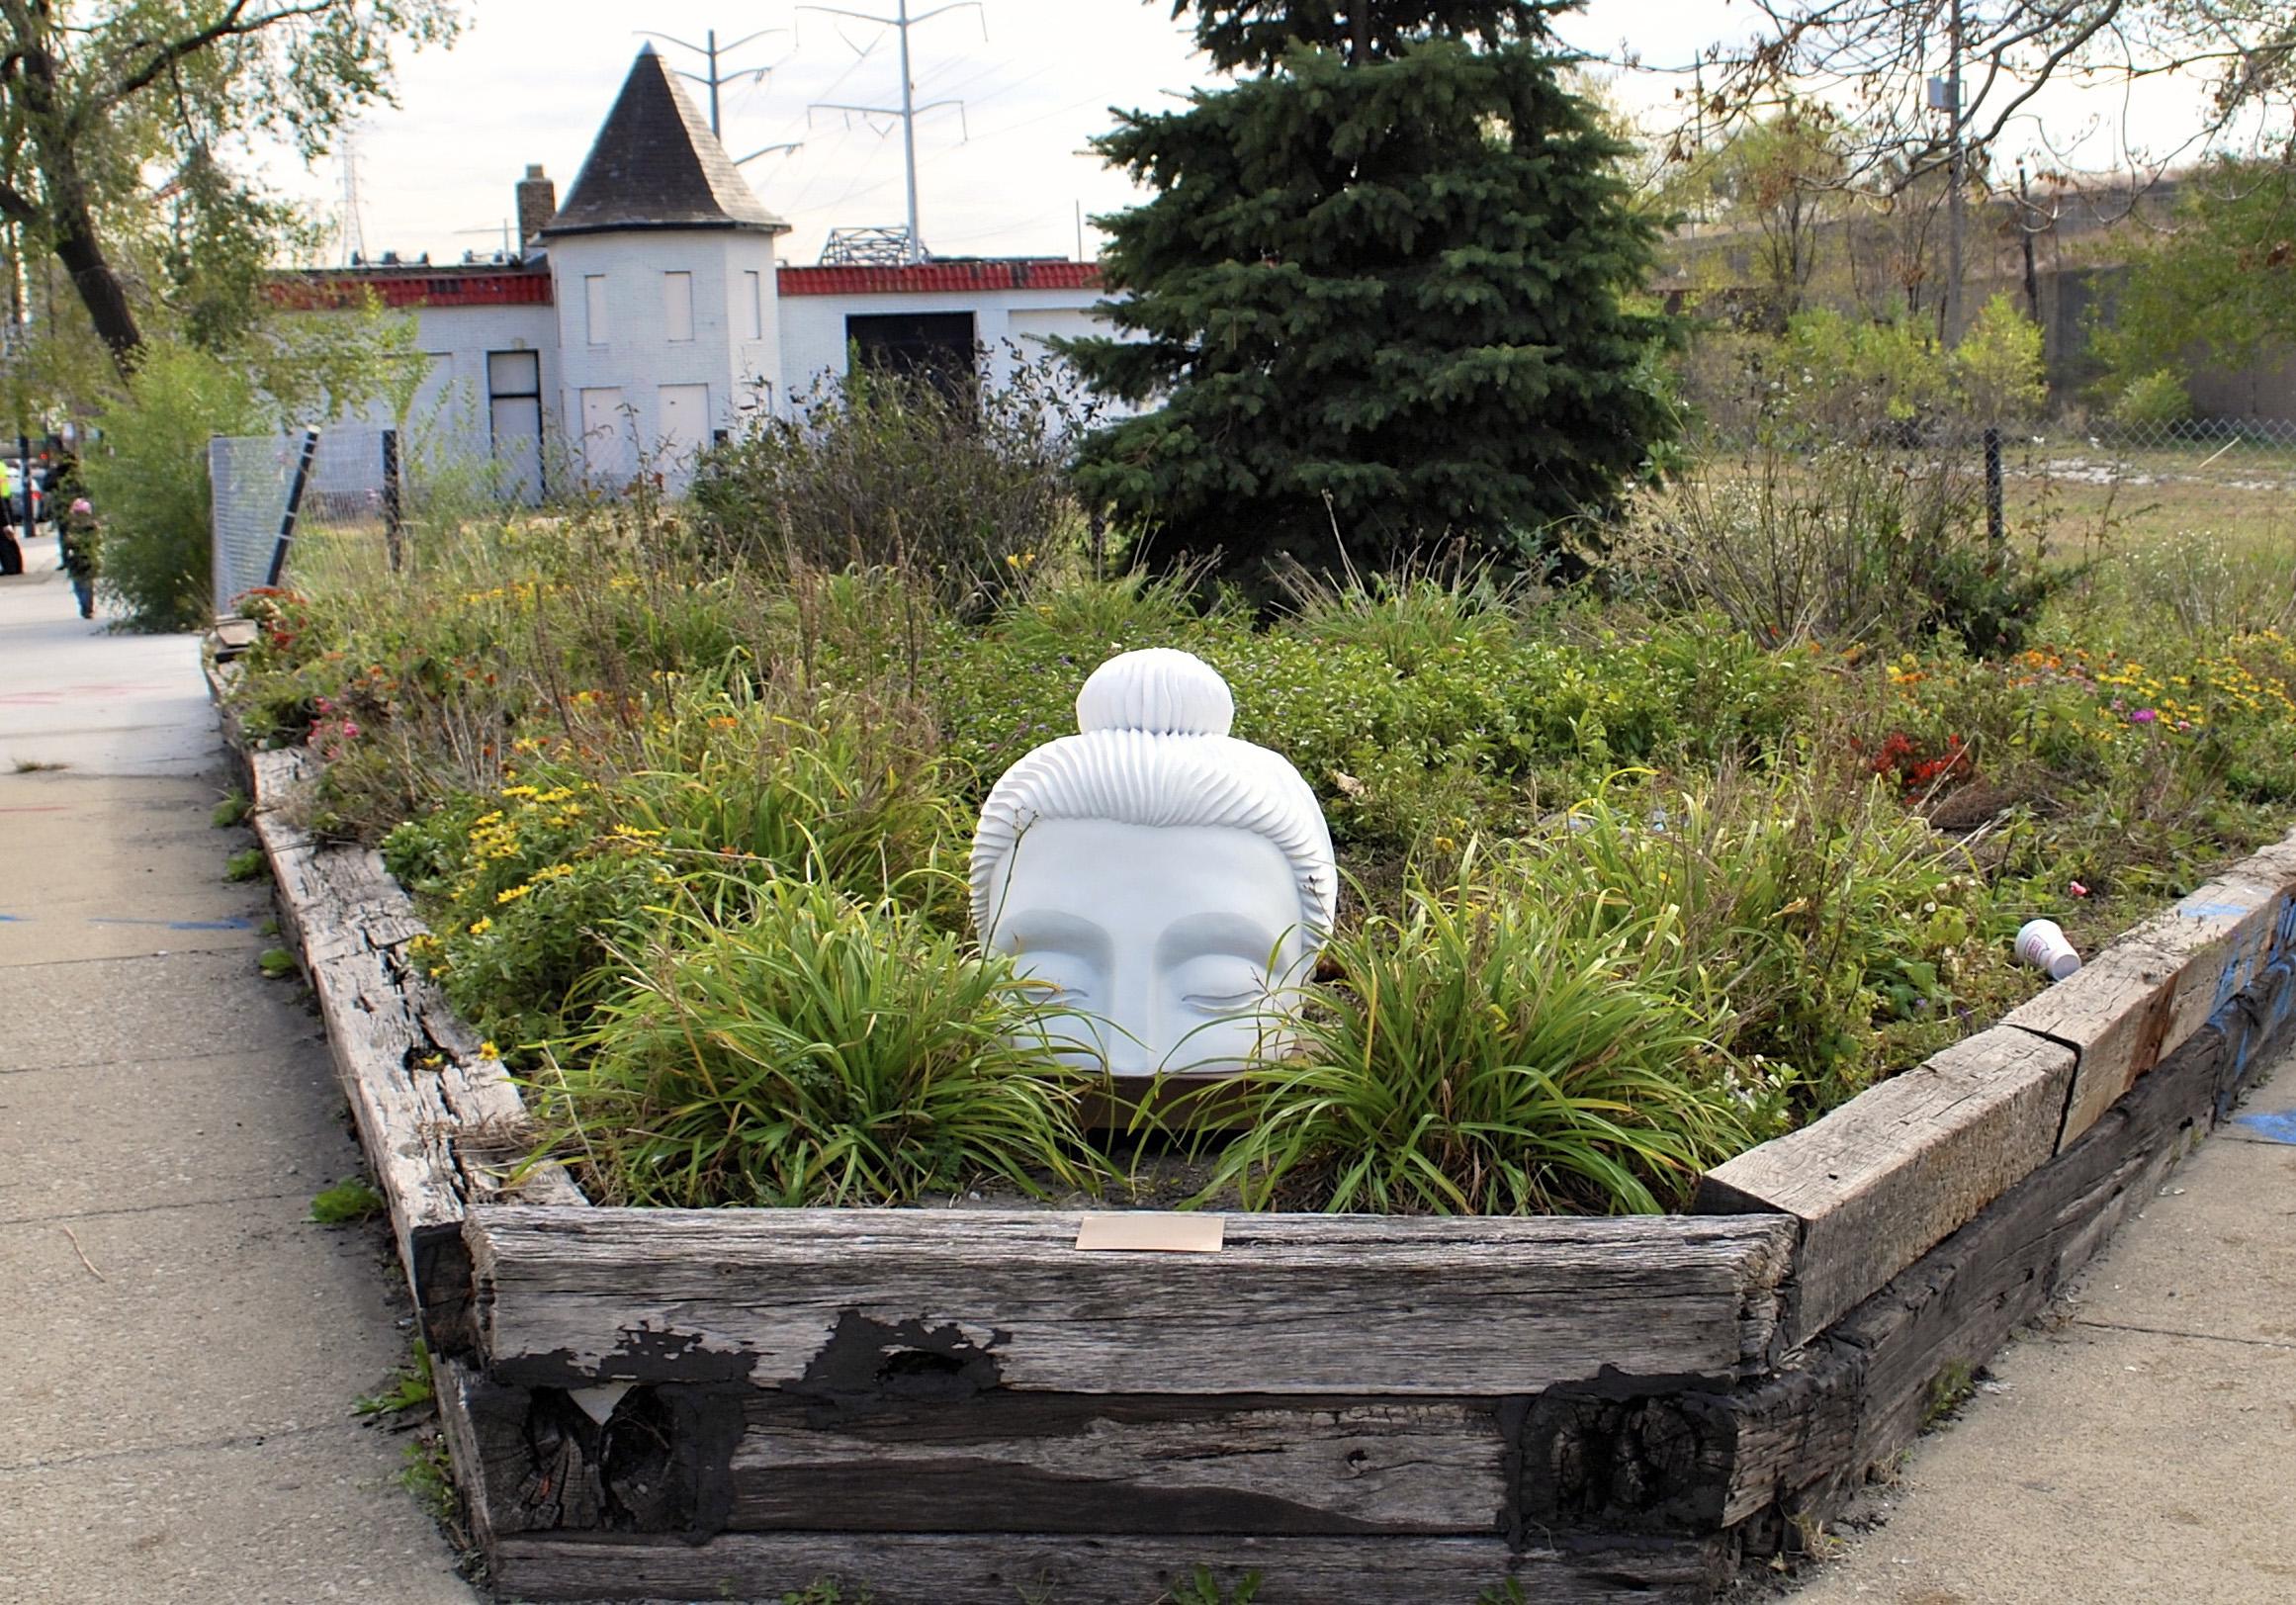 A Buddha sculpture in South Chicago